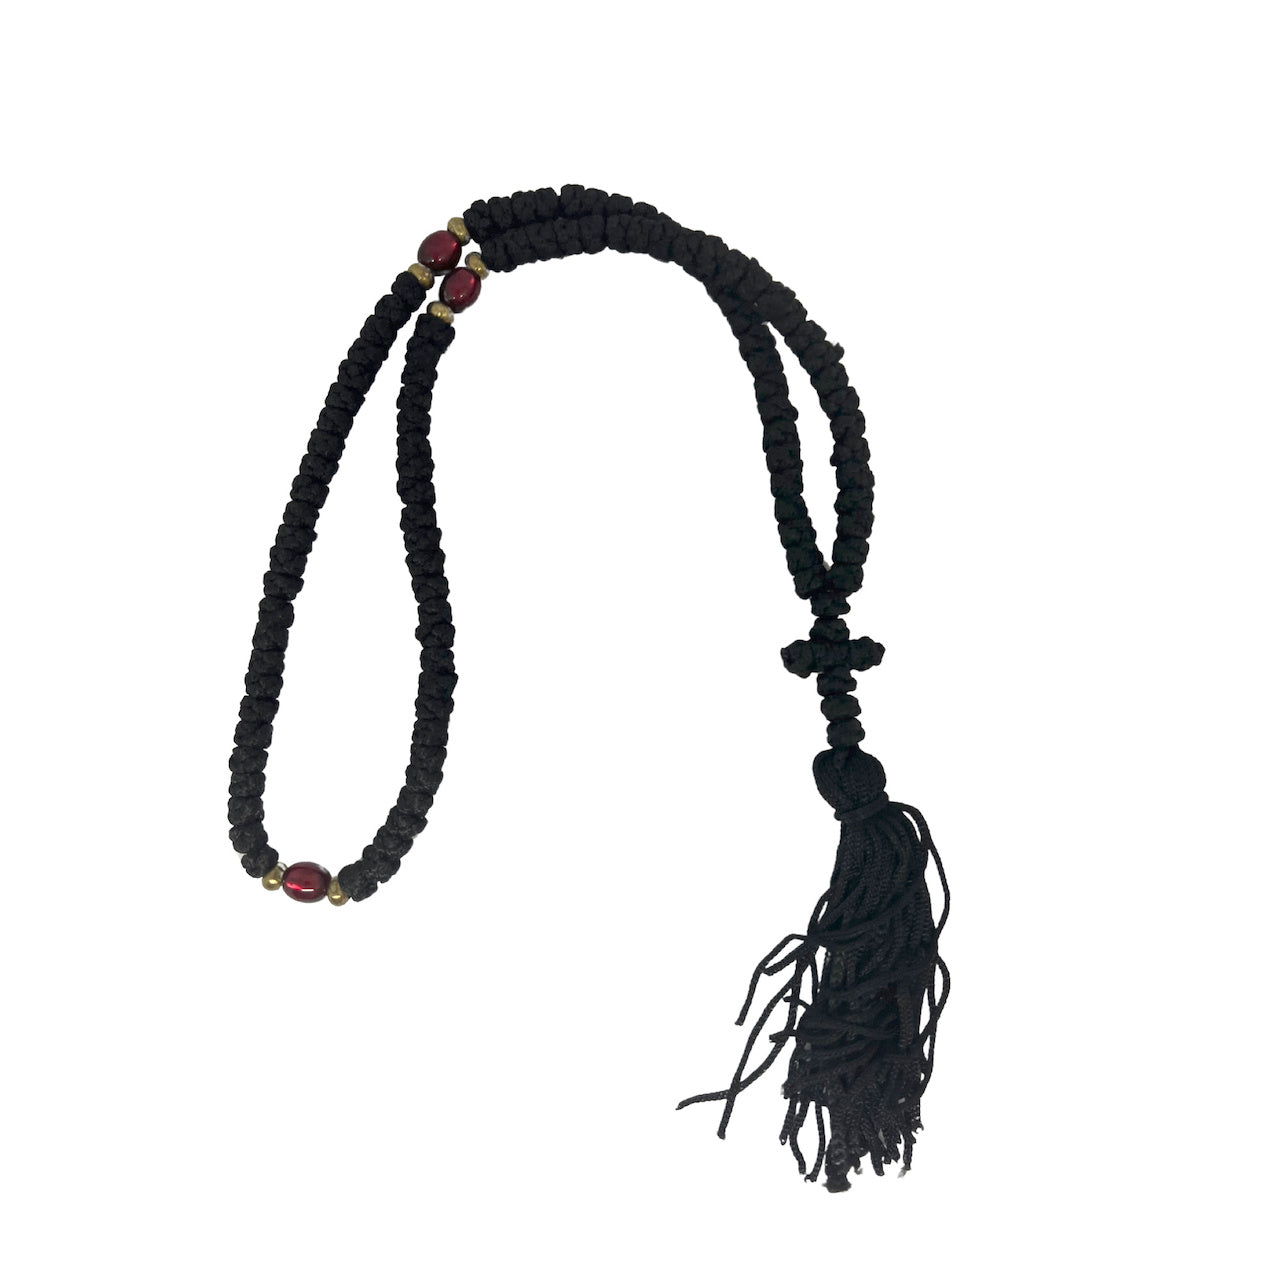 100 knots Greek Orthodox Christian Prayer Rope with Blue and red